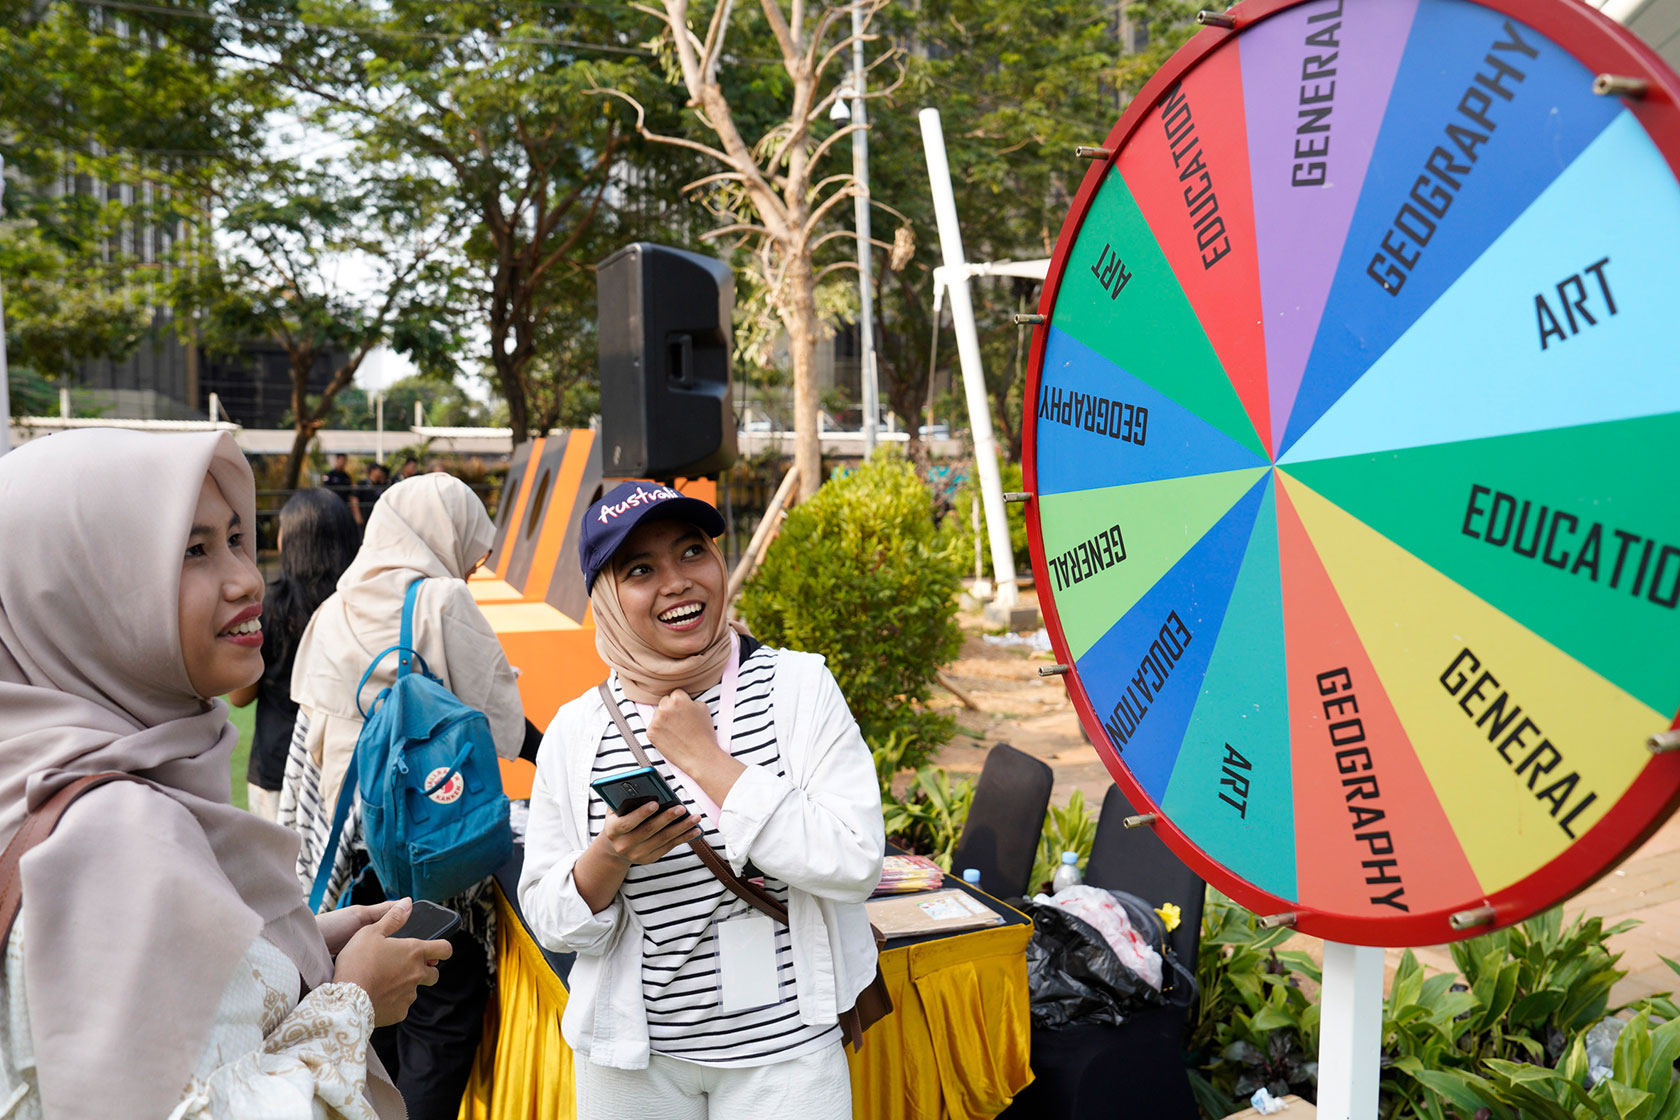 Alumni engage in enjoyable activities, including a lively game of Wheel of Fortunes.